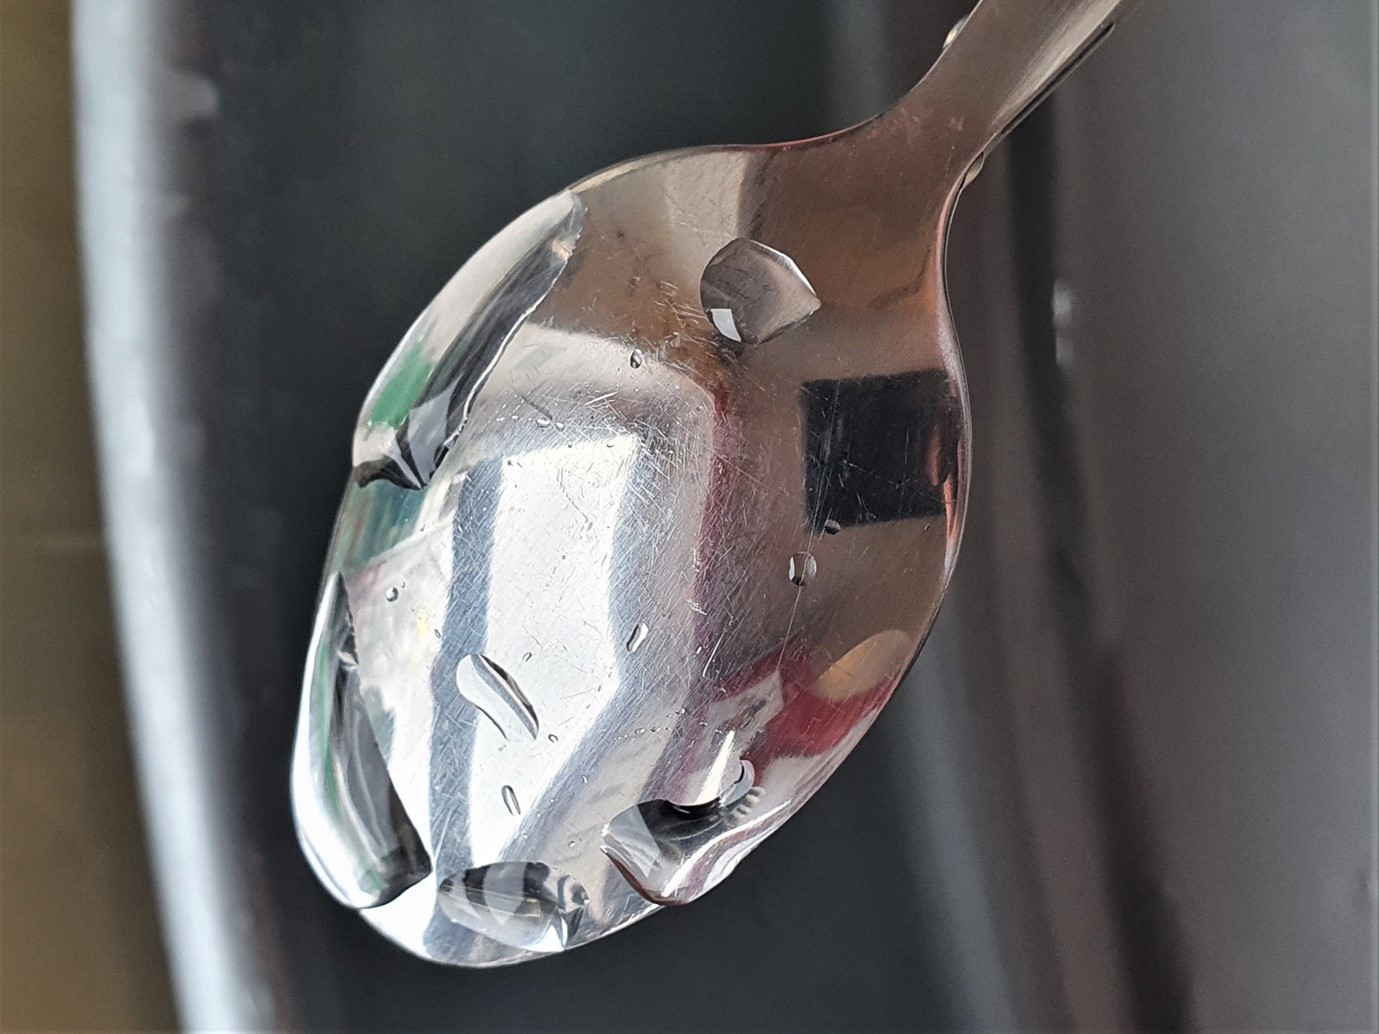 Metal spoon demonstrating the water break test, showing water beading up on the surface due to grease